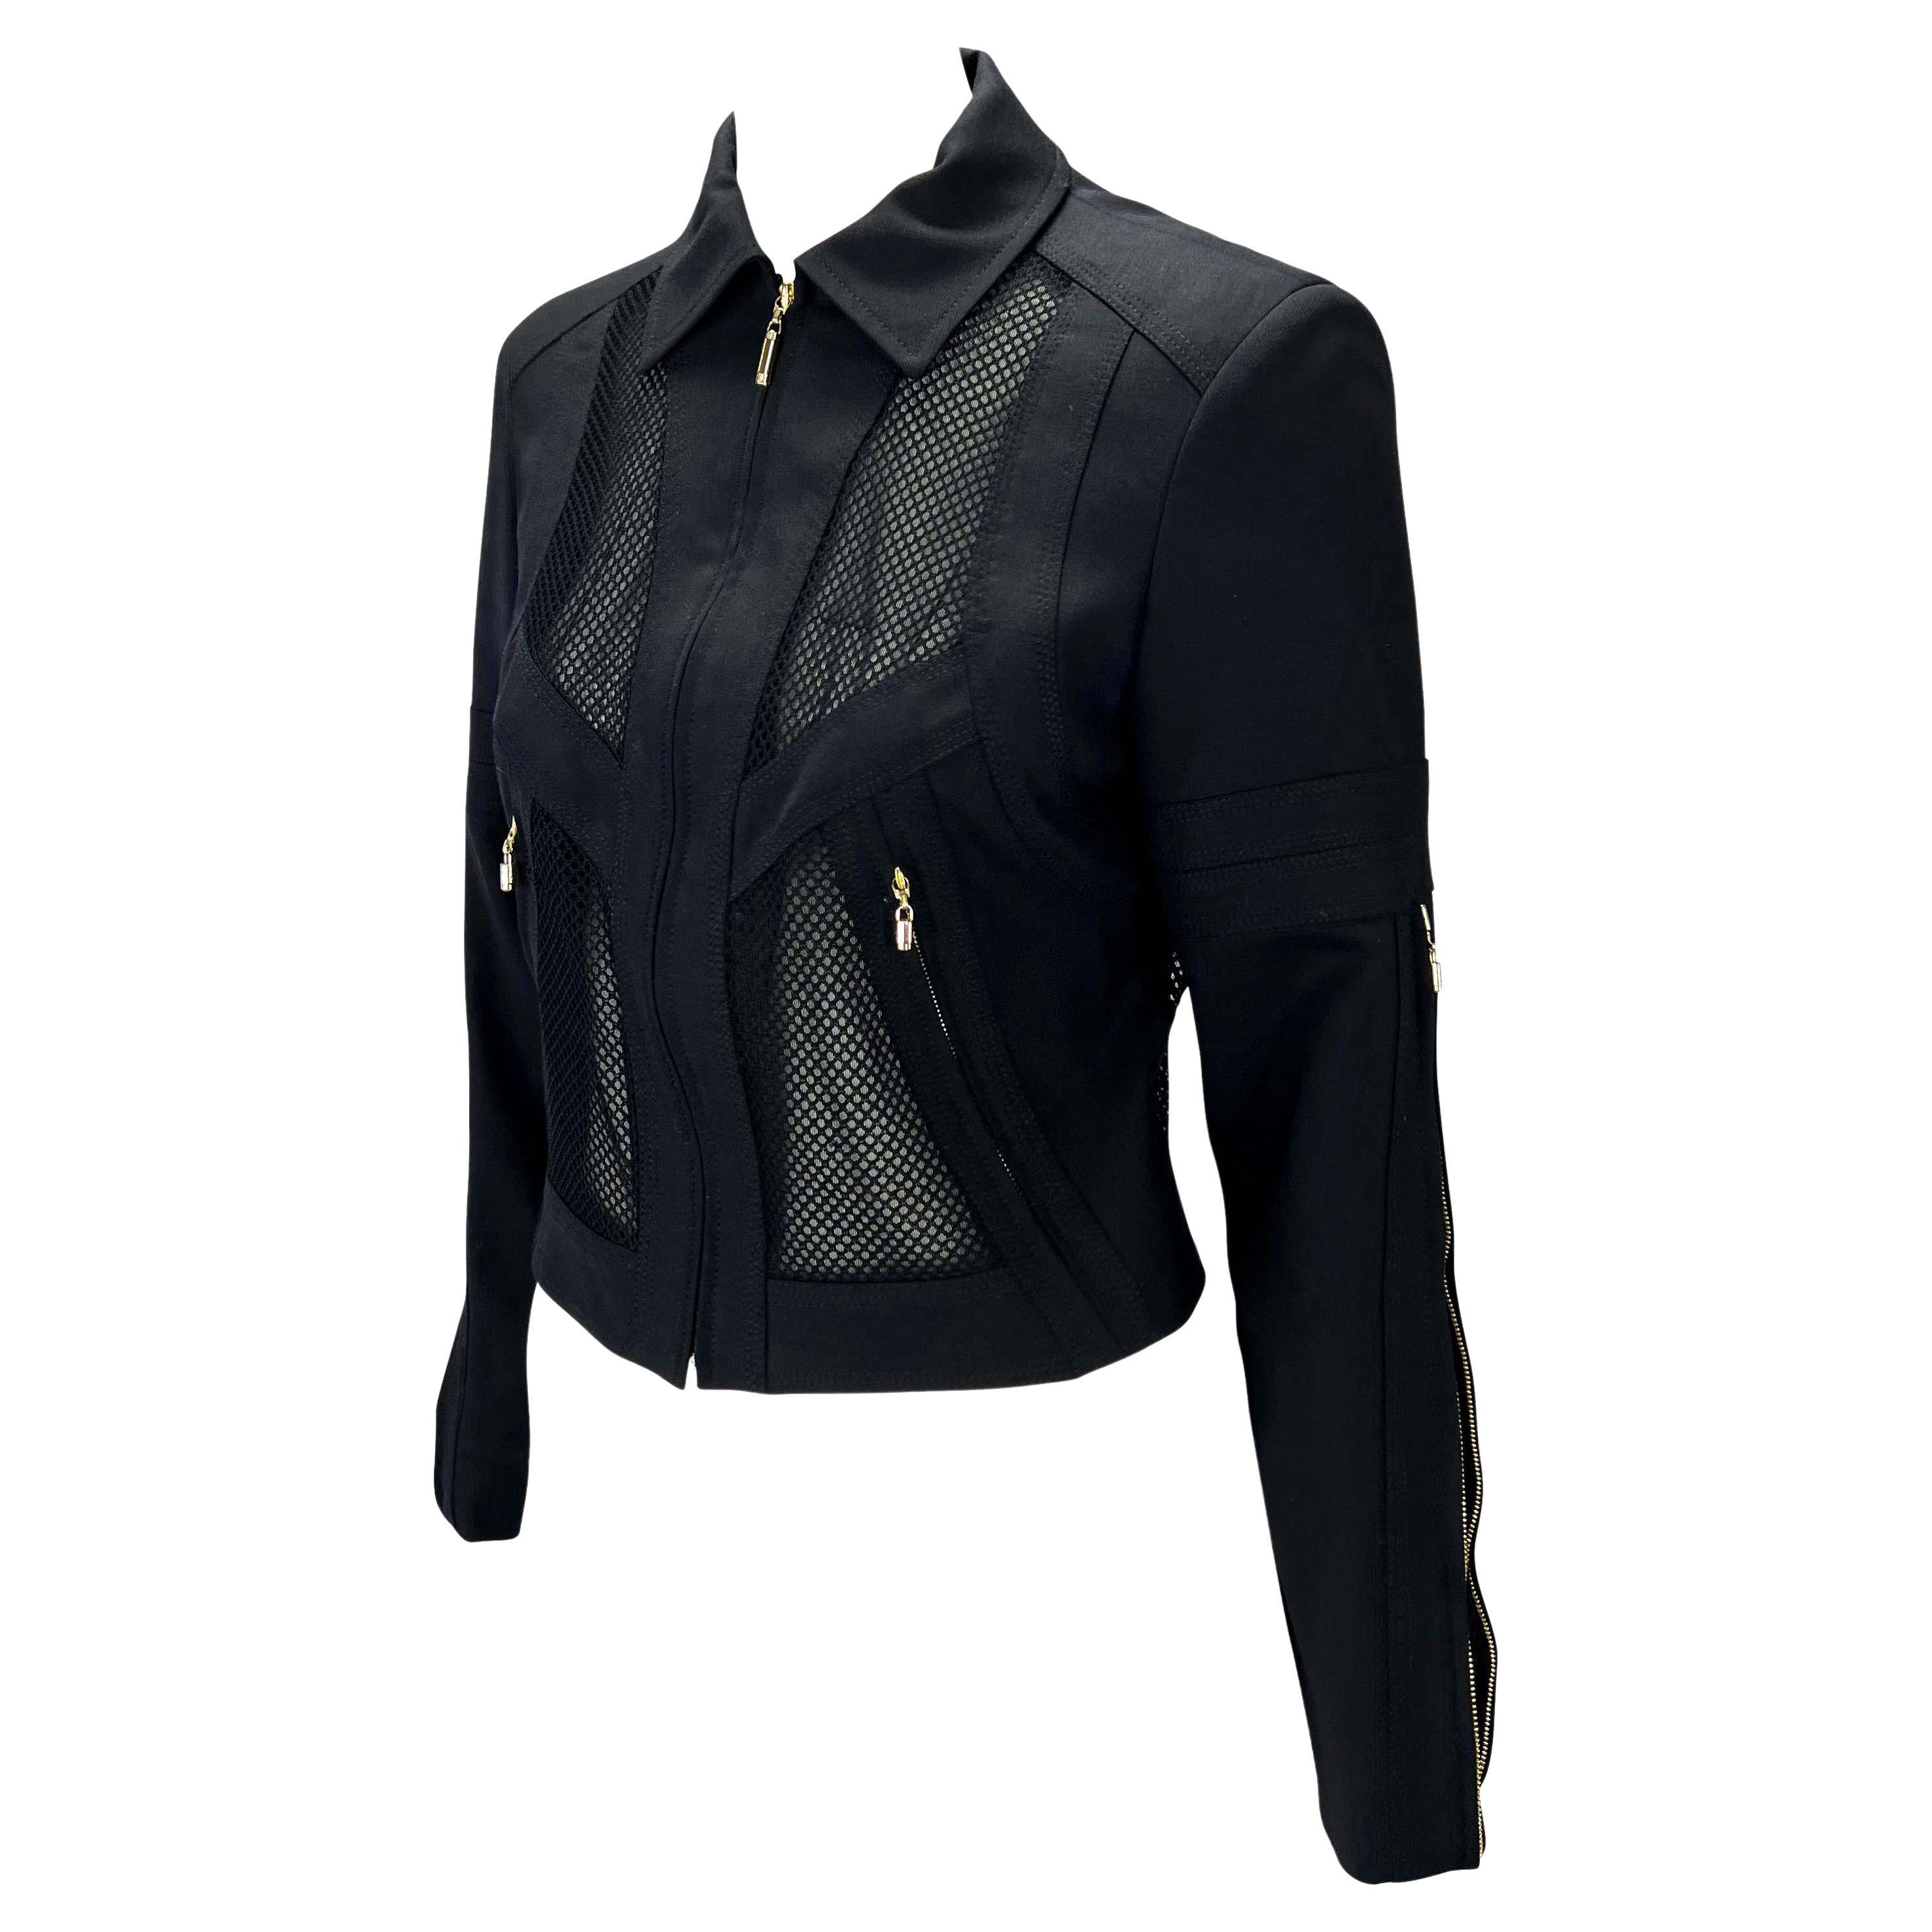 S/S 2002 Gianni Versace by Donatella Mesh Panel Sheer Black Zip Medusa Jacket In Excellent Condition For Sale In West Hollywood, CA